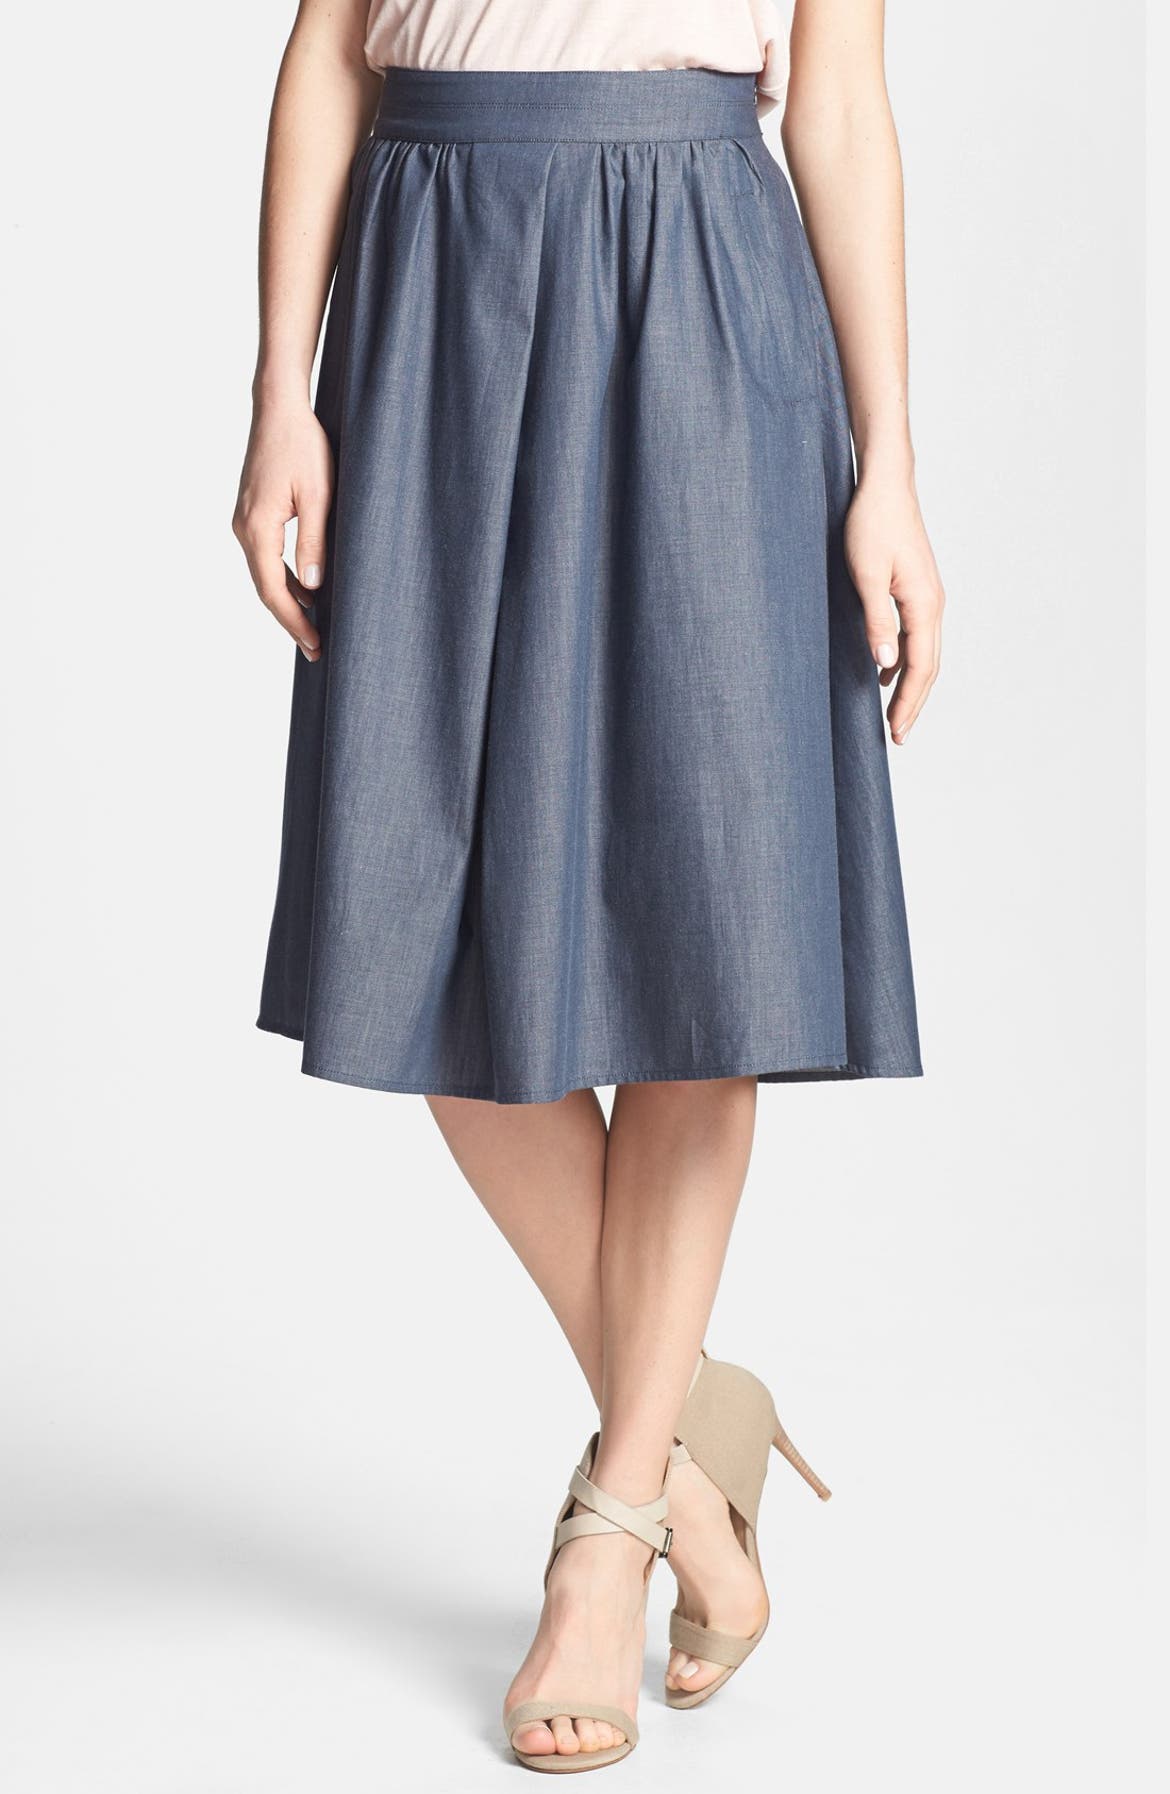 Adrianna Papell Pleated Cotton Skirt | Nordstrom